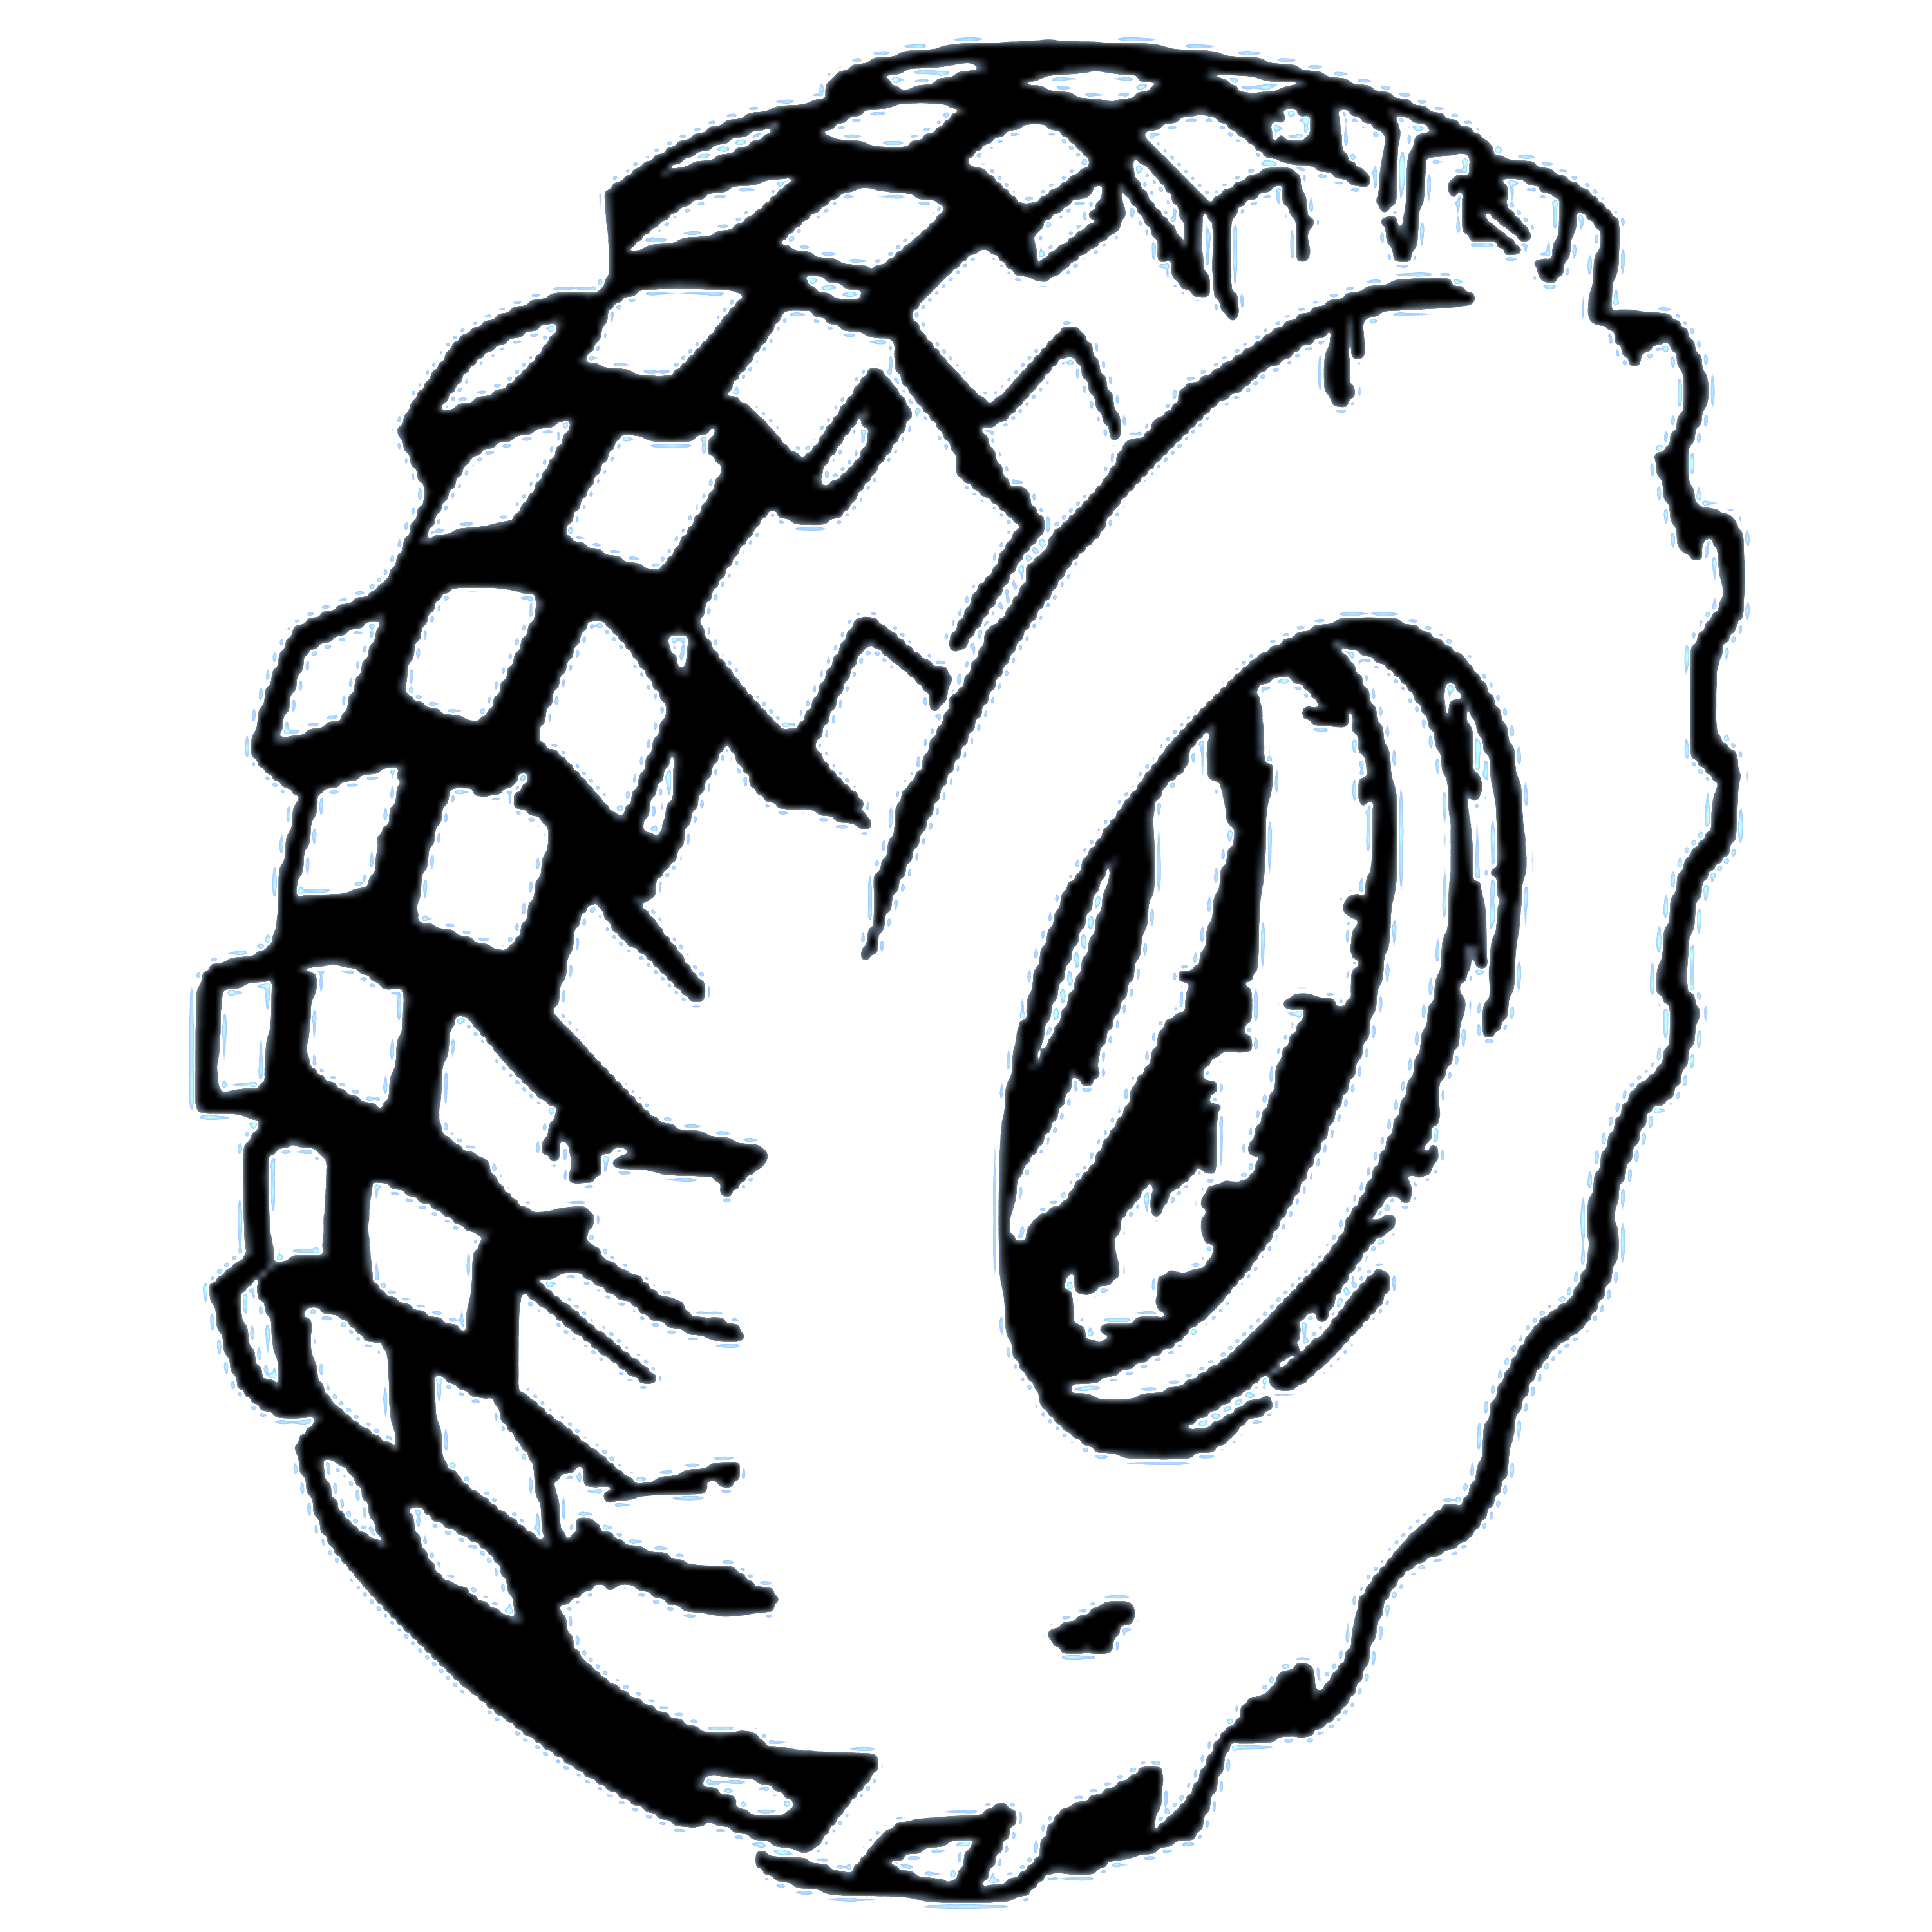 Border clipart tires and road